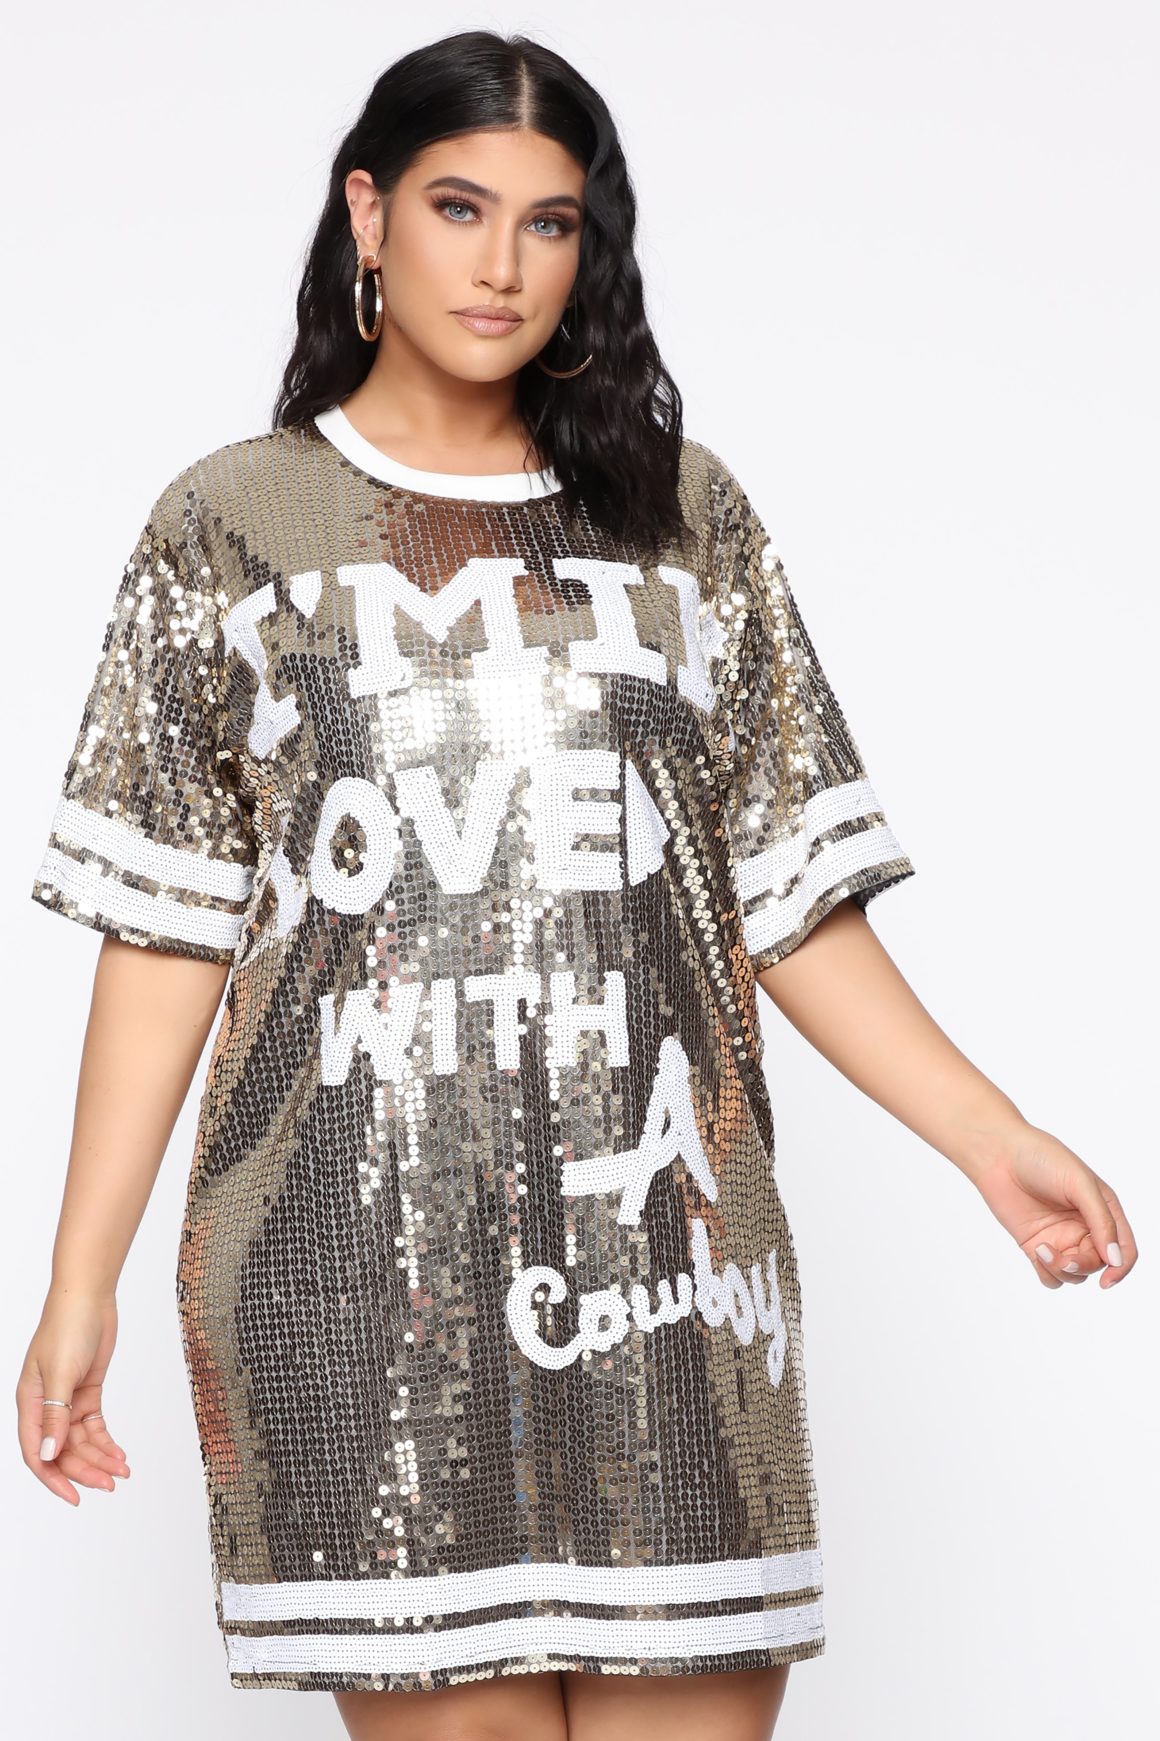 Angela Simmons Shimmered in a Sequined Fashion Nova T-Shirt Dress ...